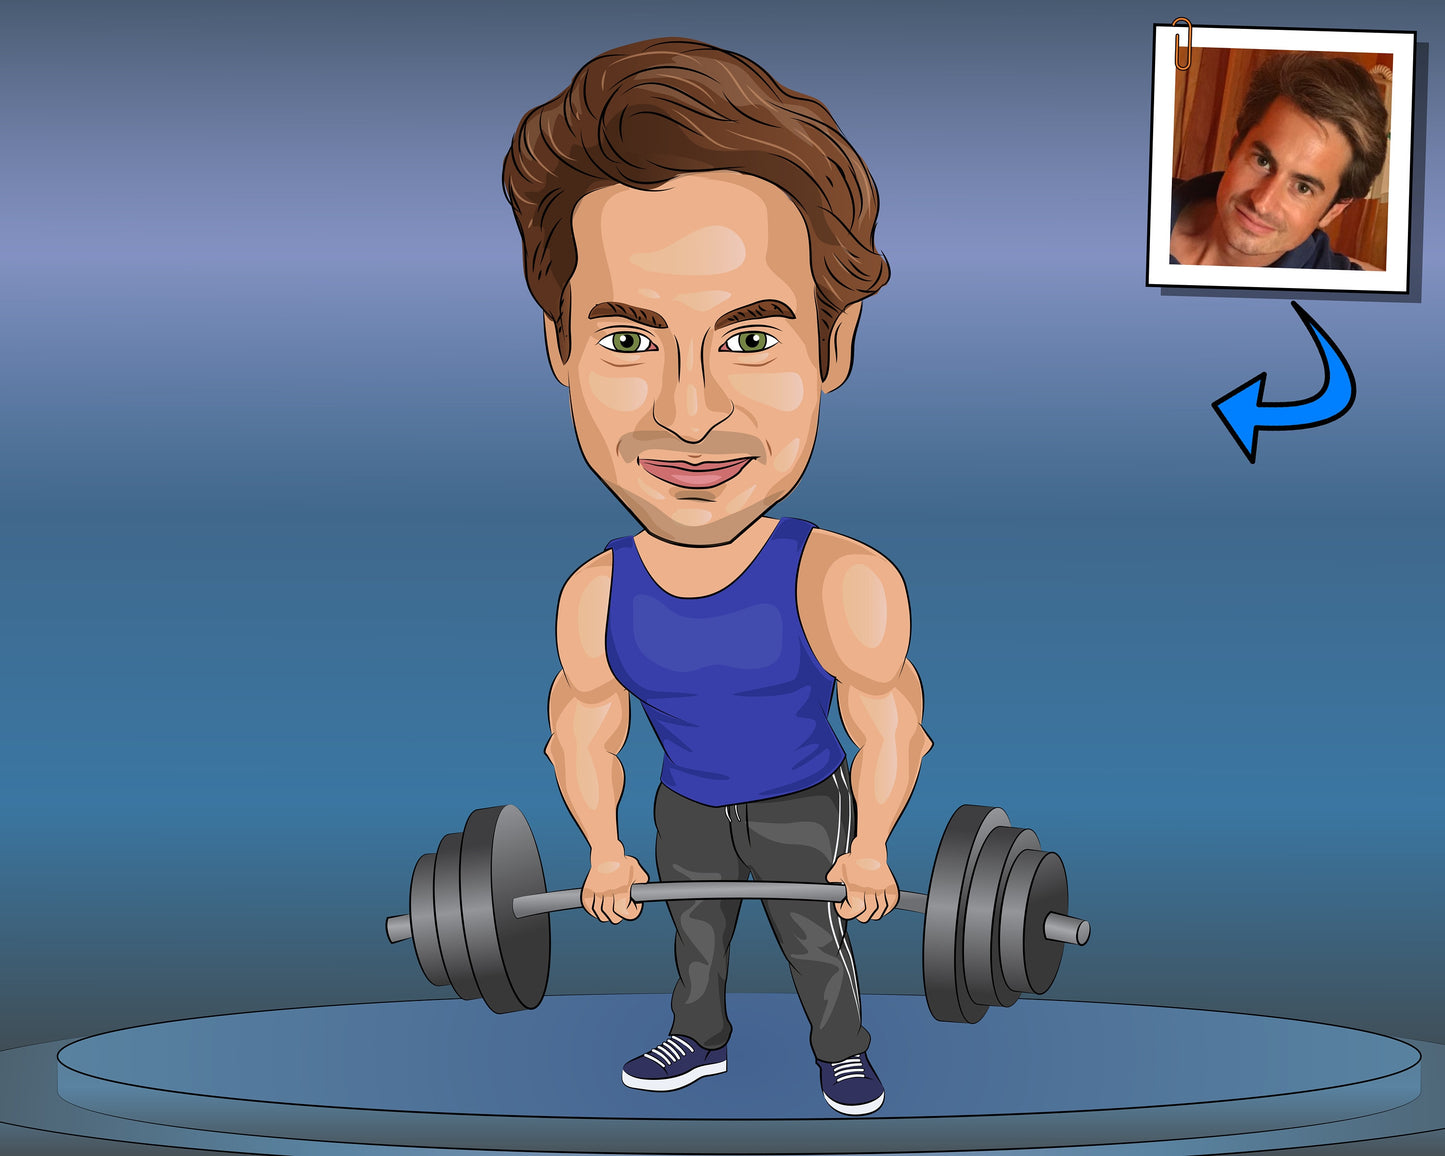 Weightlifter Gift - Custom Caricature From Your Photo/powerlifting/weightlifting gift